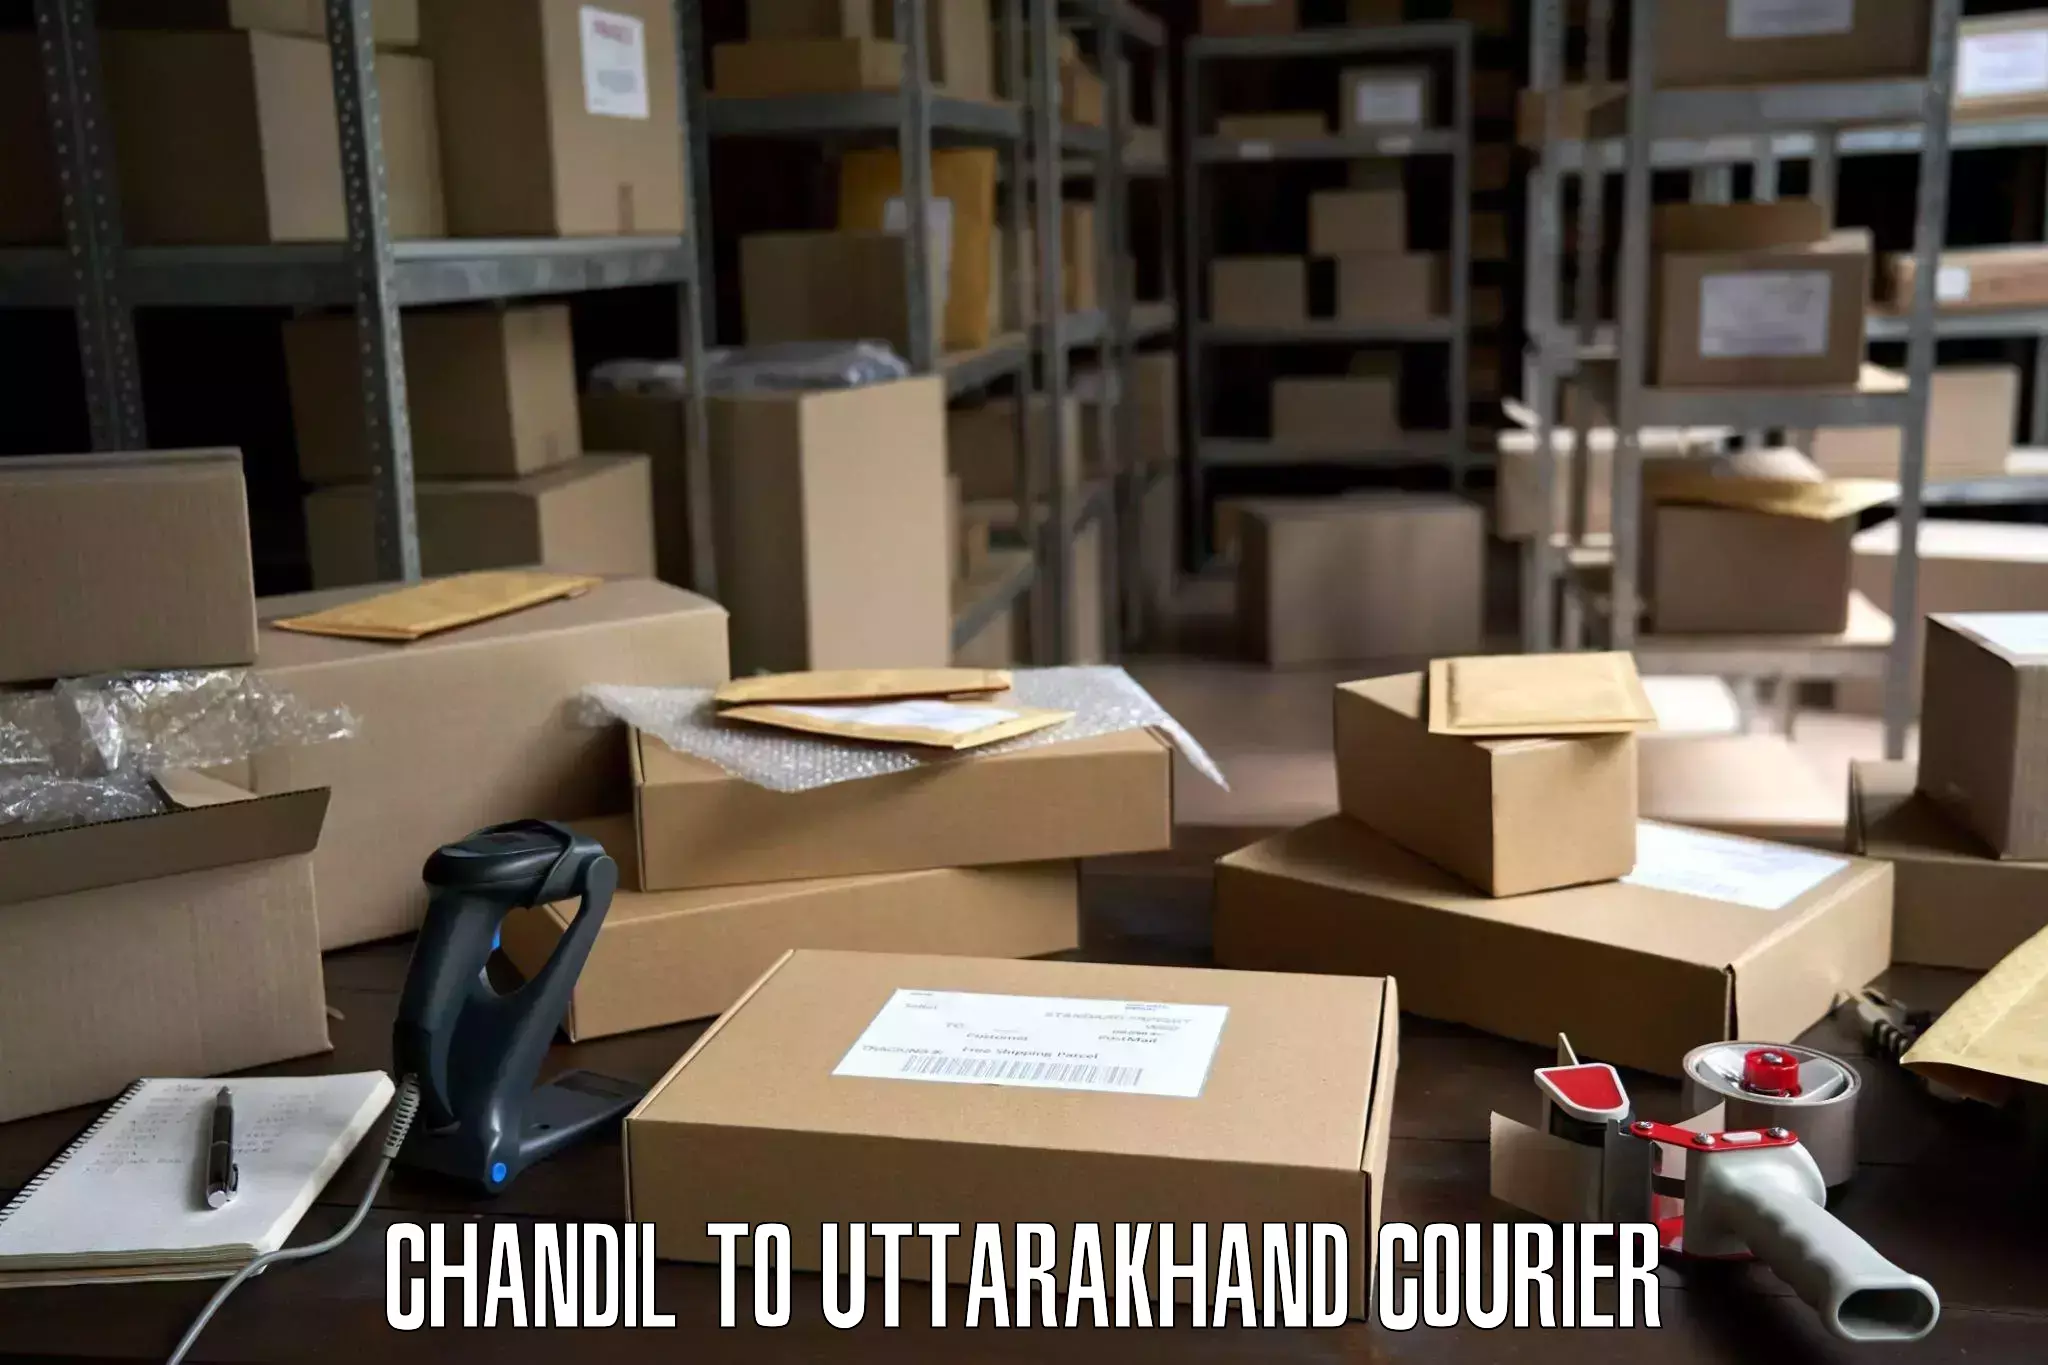 Trusted moving company Chandil to Rudraprayag